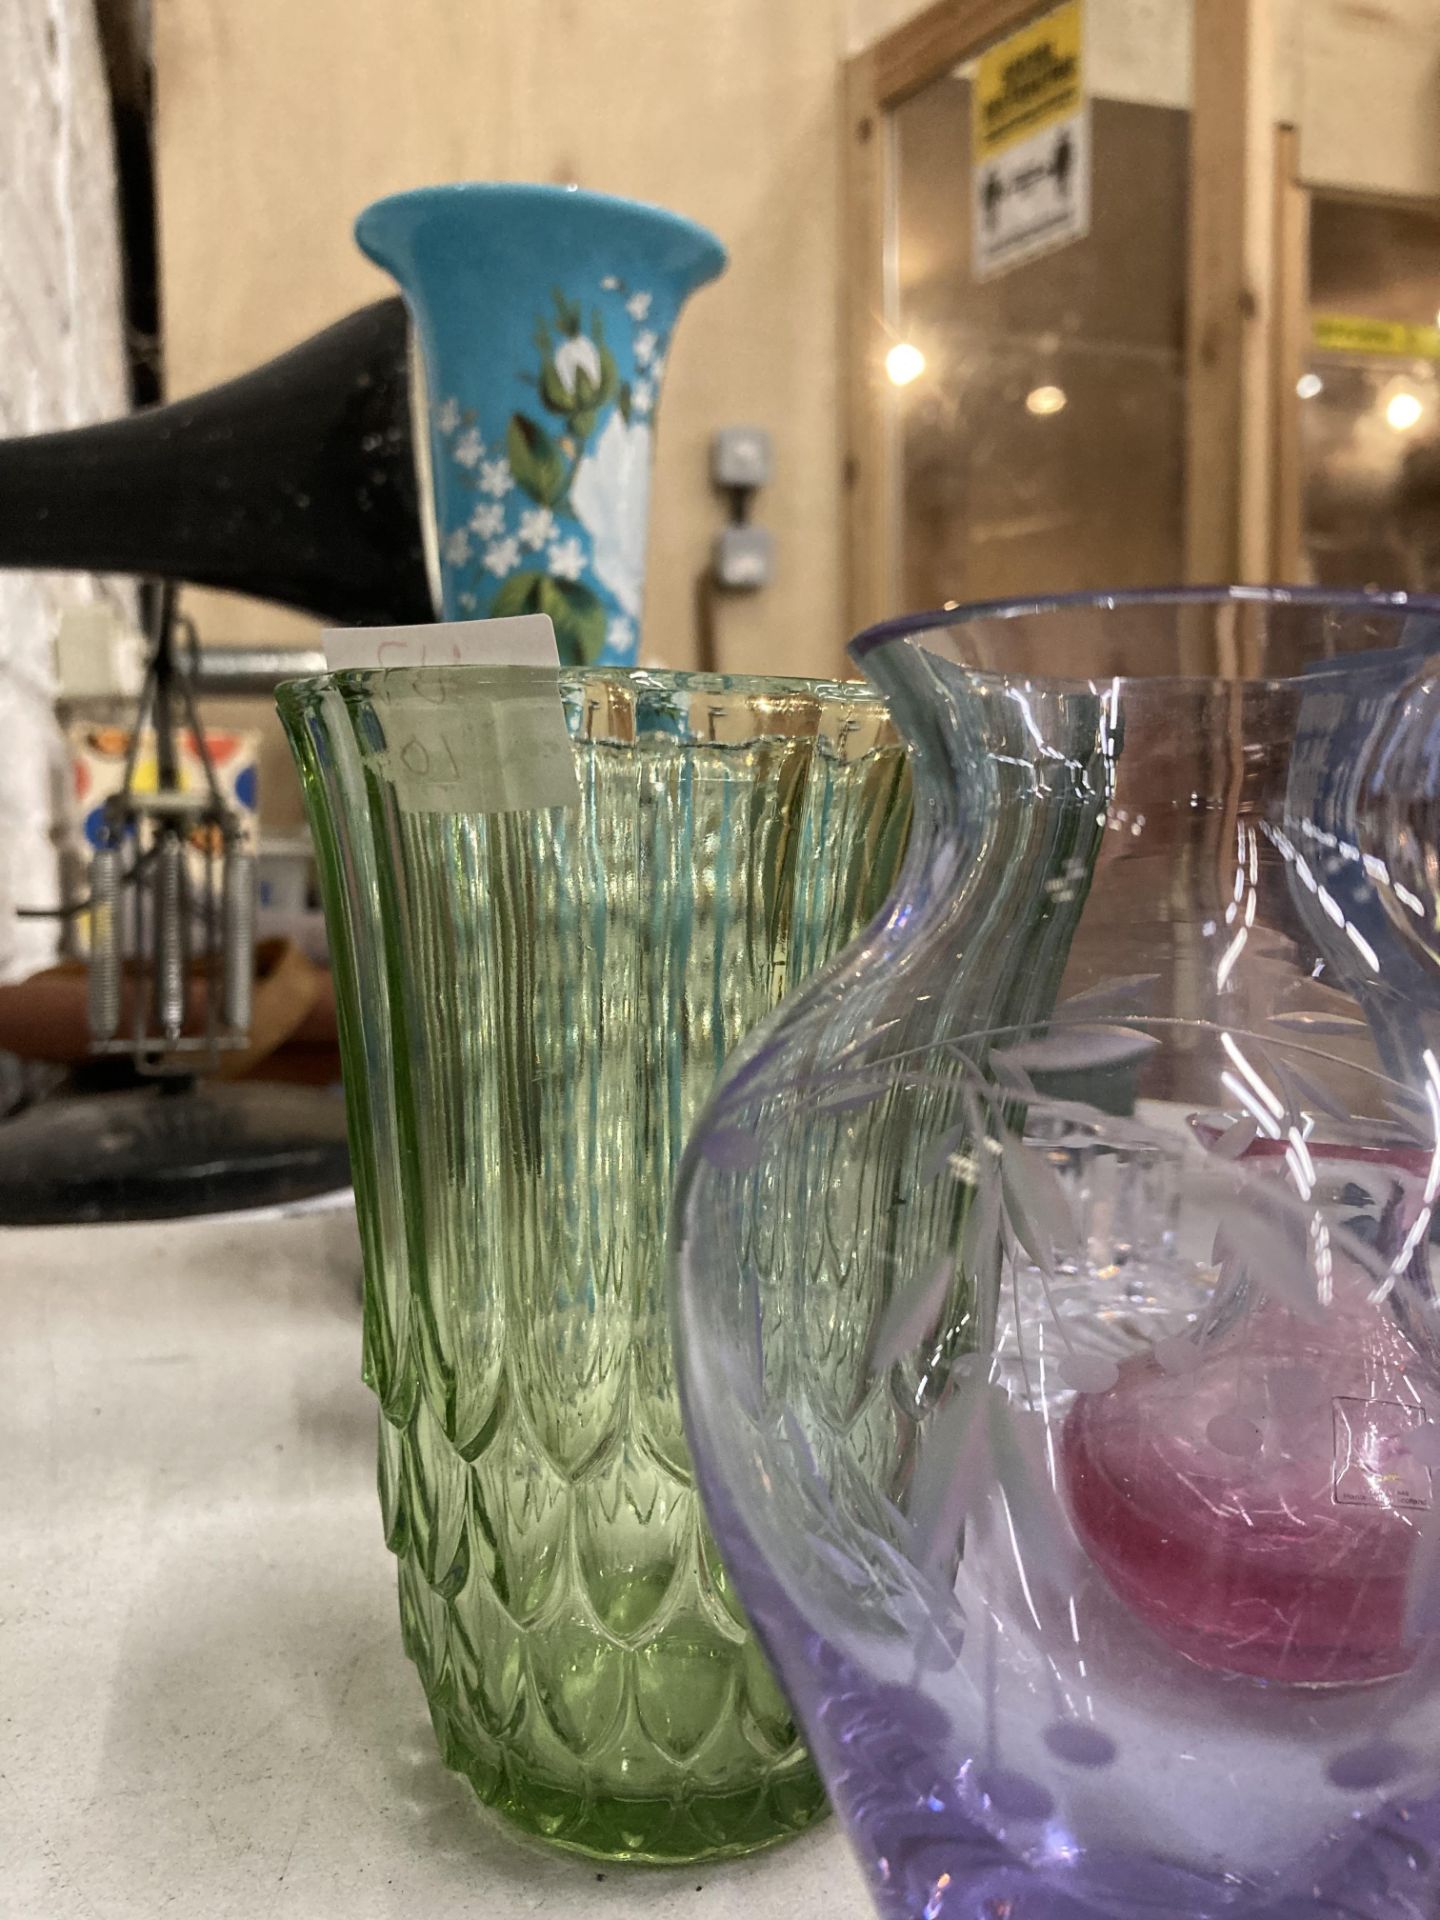 A QUANTITY OF COLOURED ART GLASS TO INCLUDE CAITNESS STYLE VASES, A VINTAGE TURQUOISE VASE WITH A - Image 4 of 4